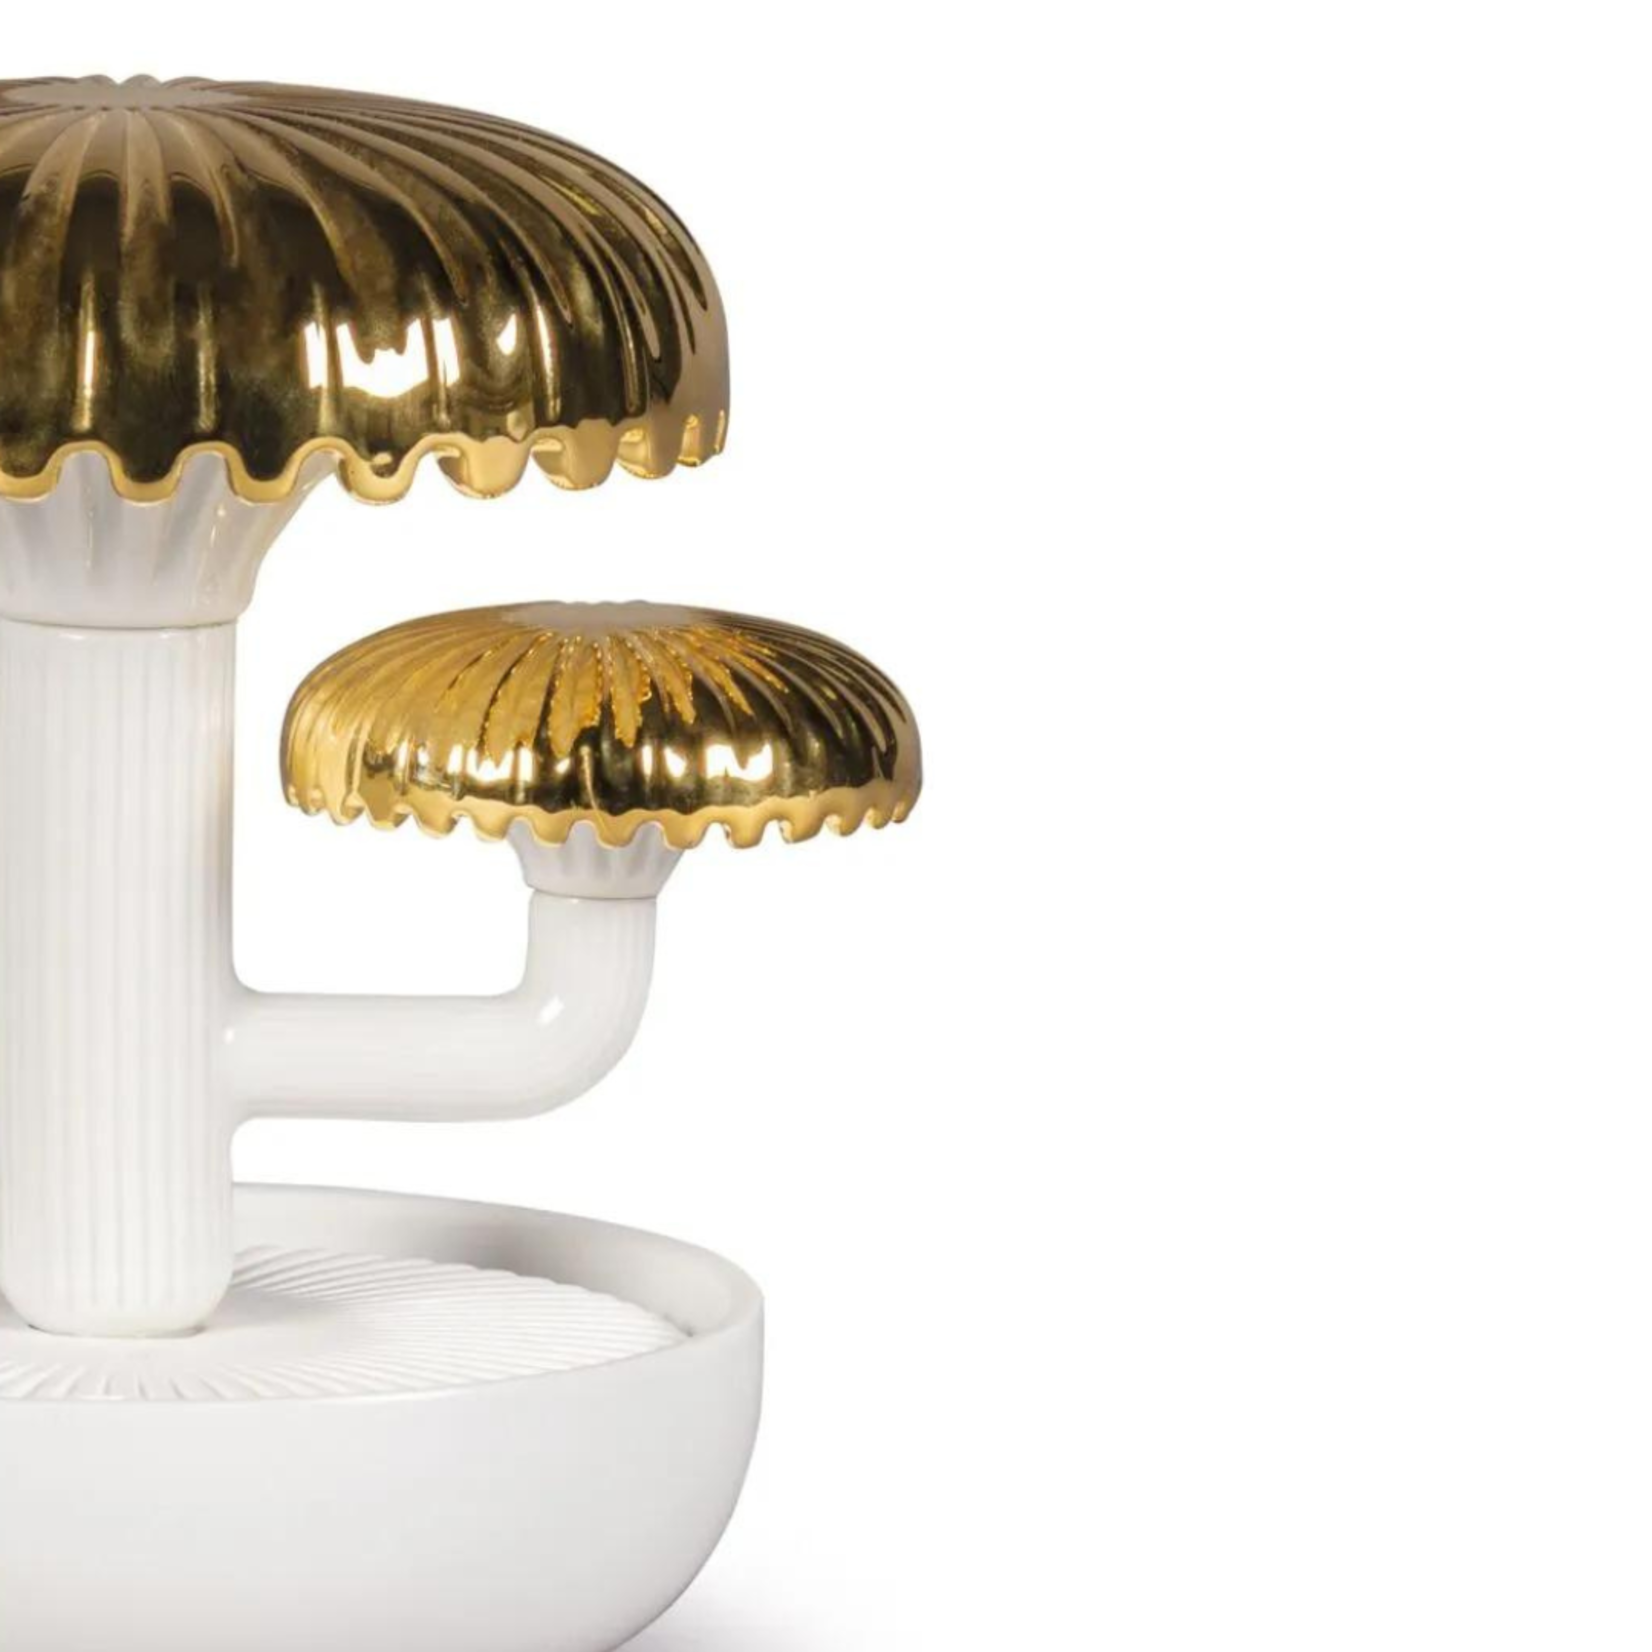 Lladro Boletus 2 Diffuser- Gold -Night Approaches Scent